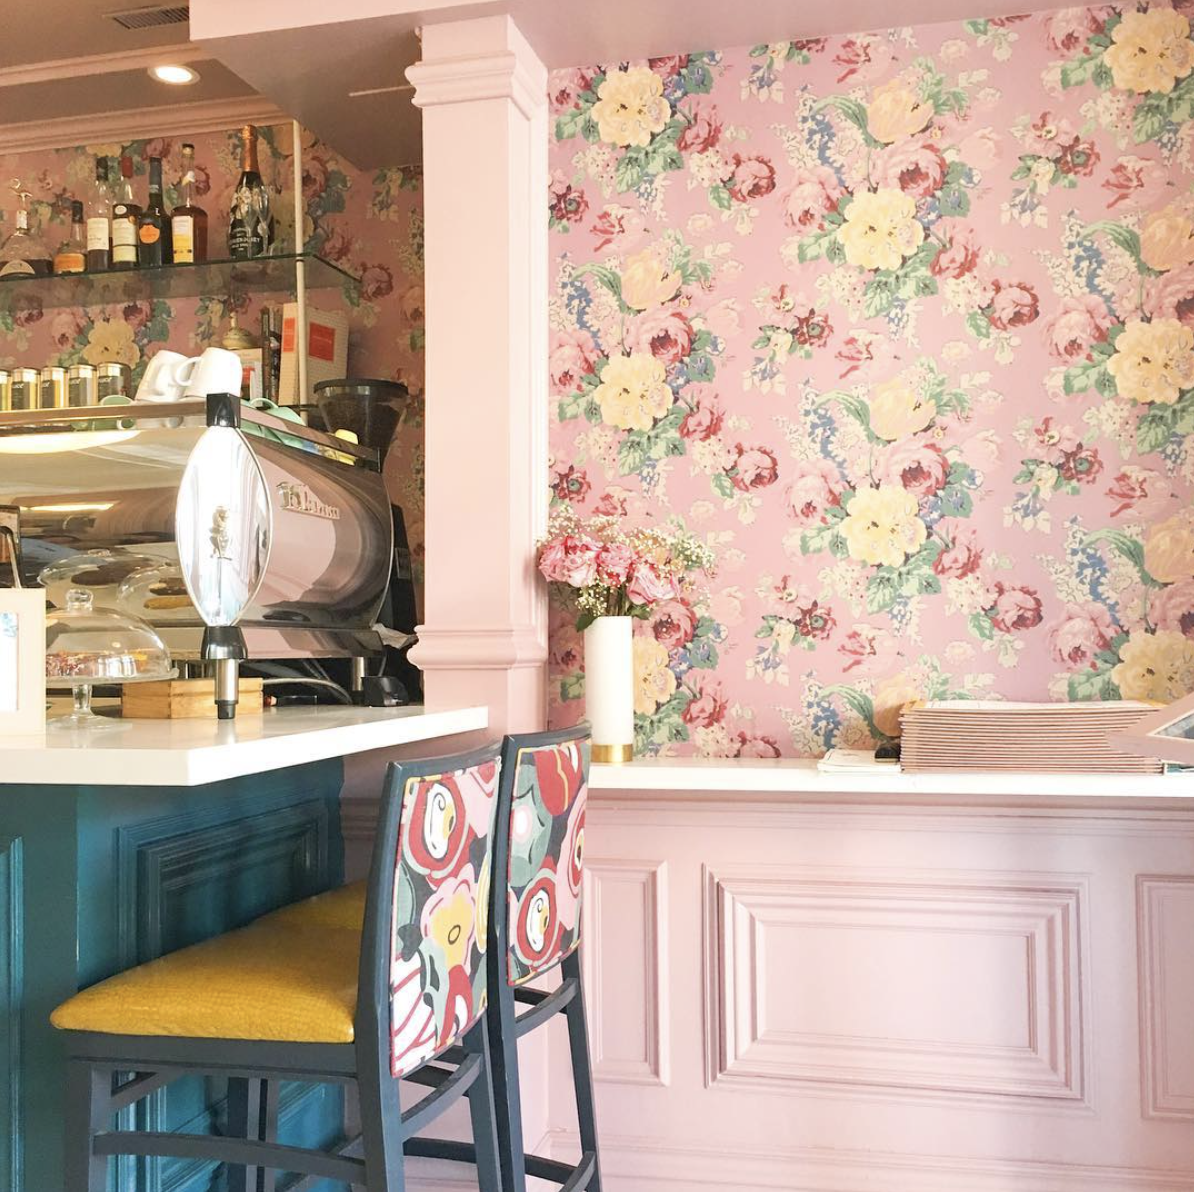 6 Cute & Pretty Cafe's in Toronto | The Pink Brunette